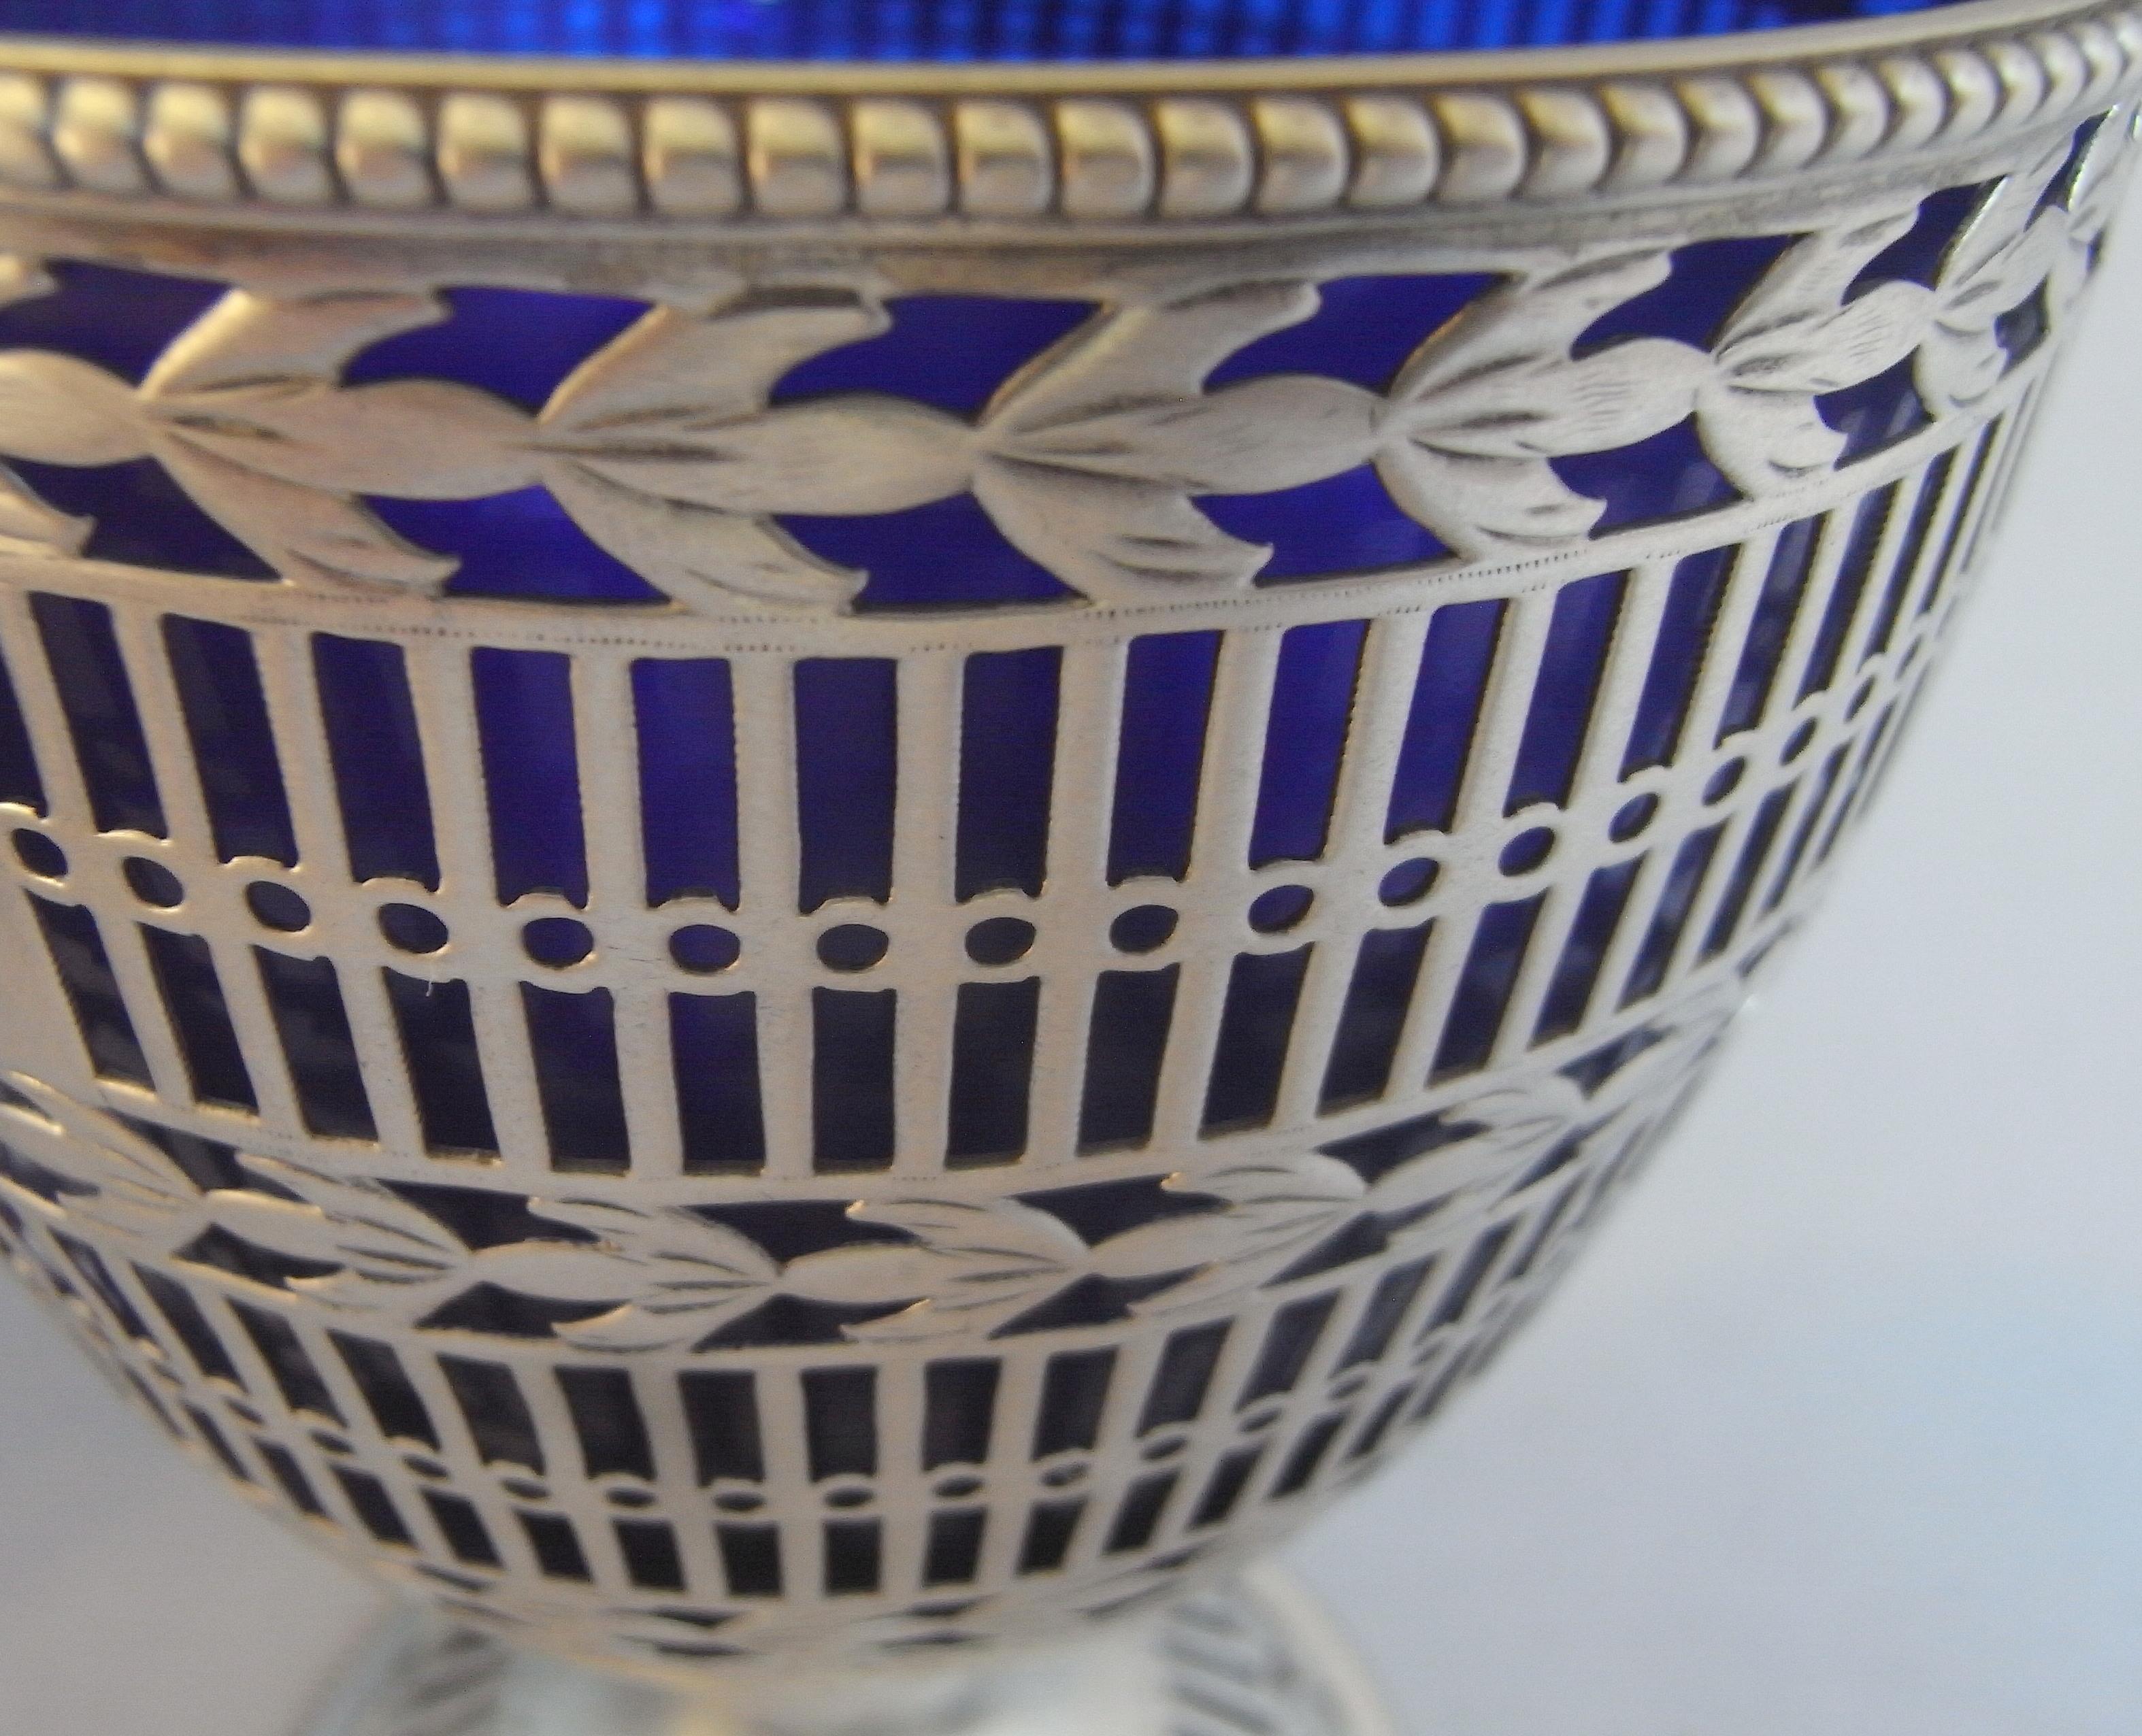 English George III Neo Classical Sugar Basket Made in London by Hester Bateman, 1779 For Sale